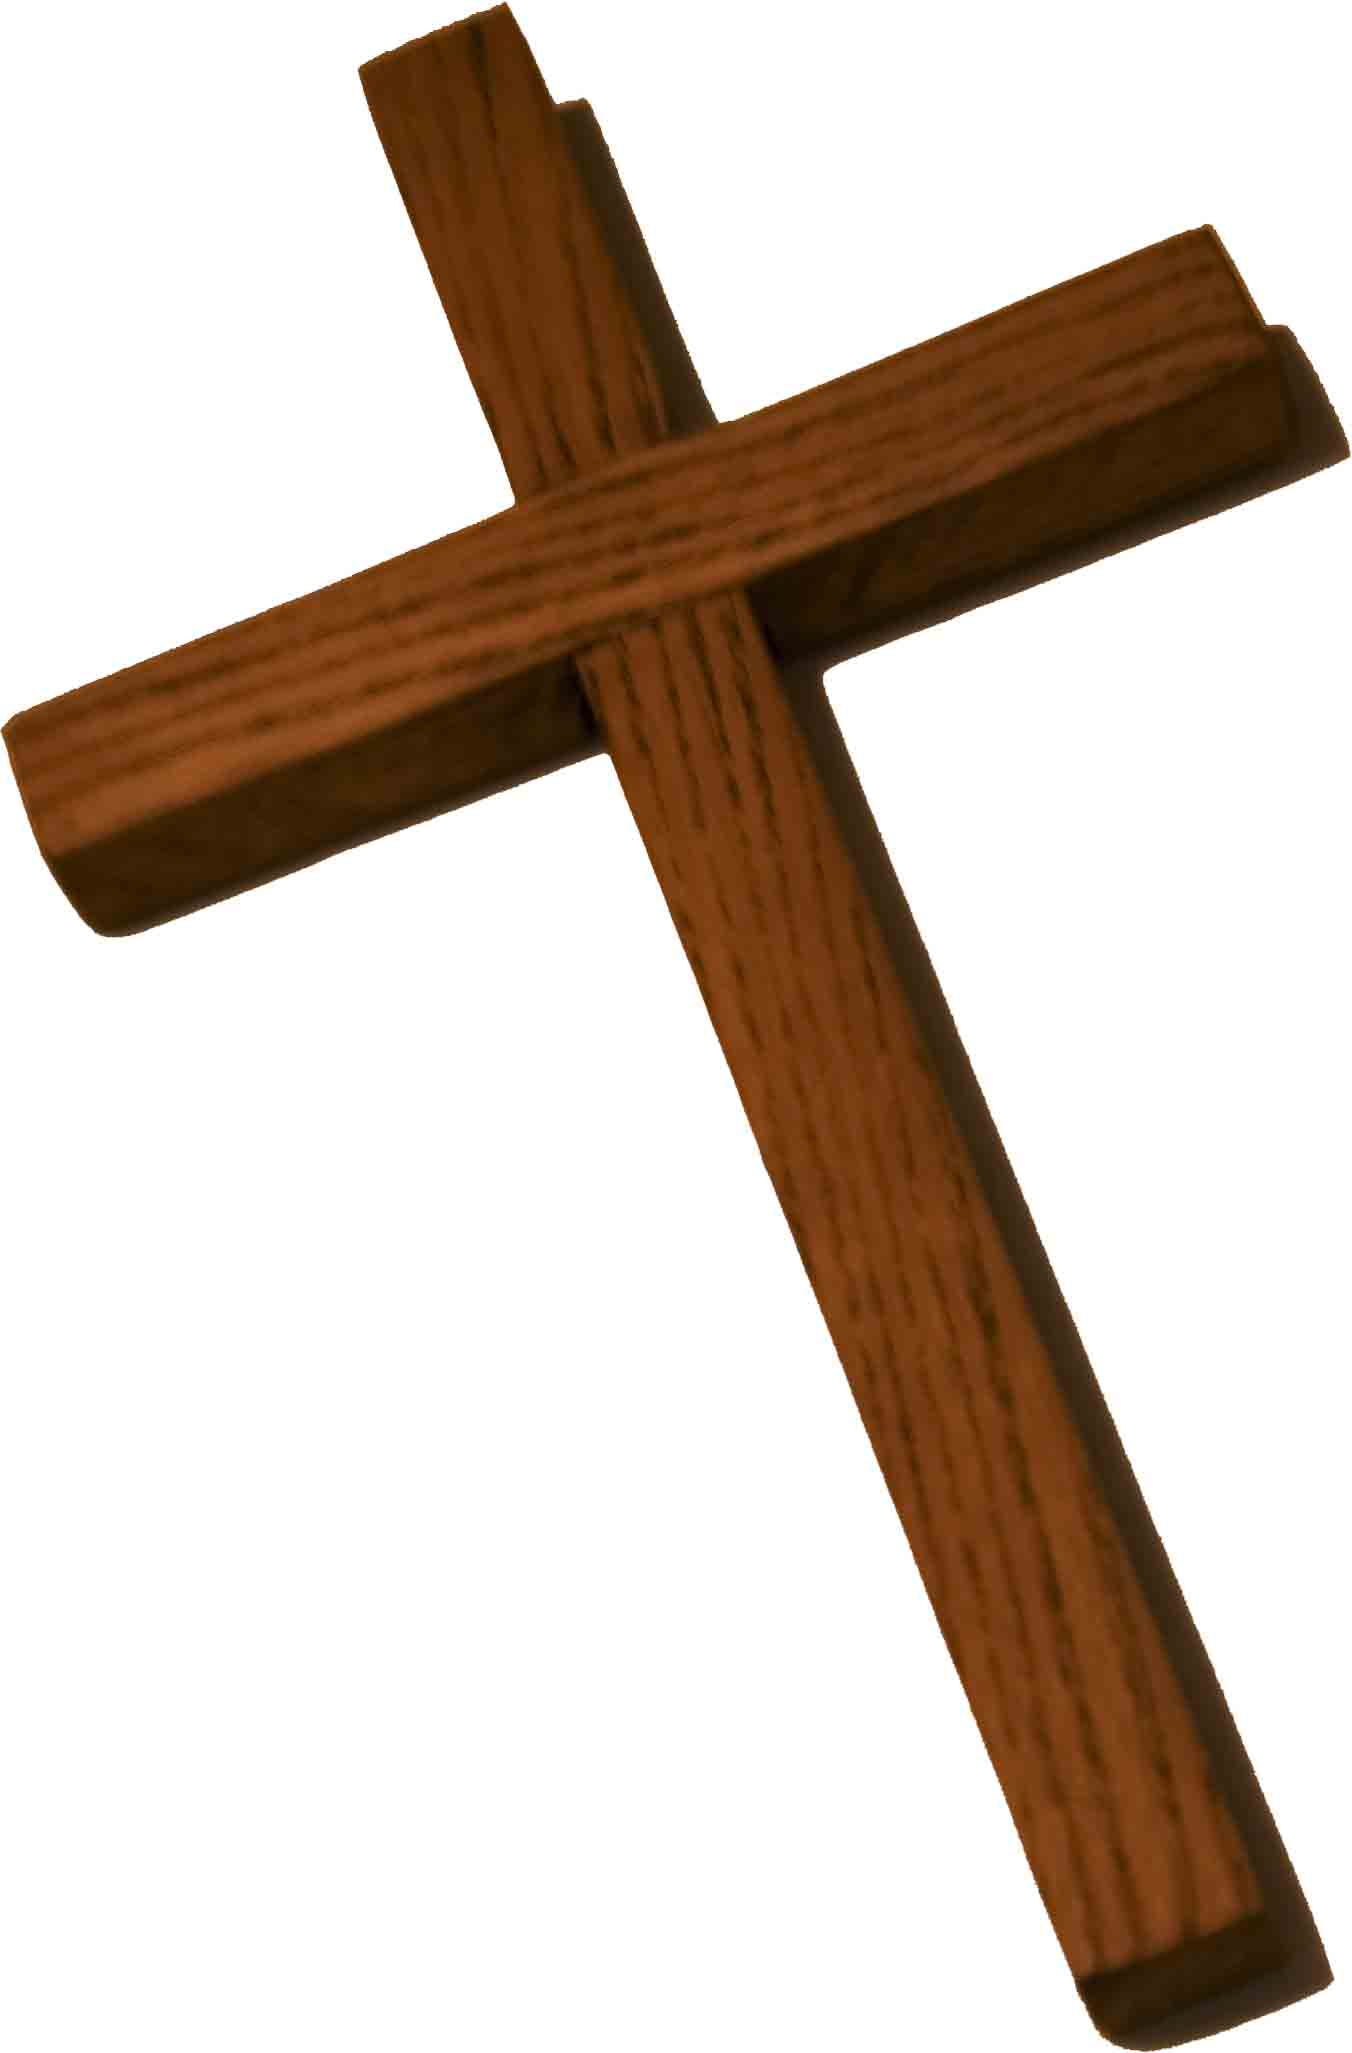 Wood Cross Clipart - Free Clipart Images